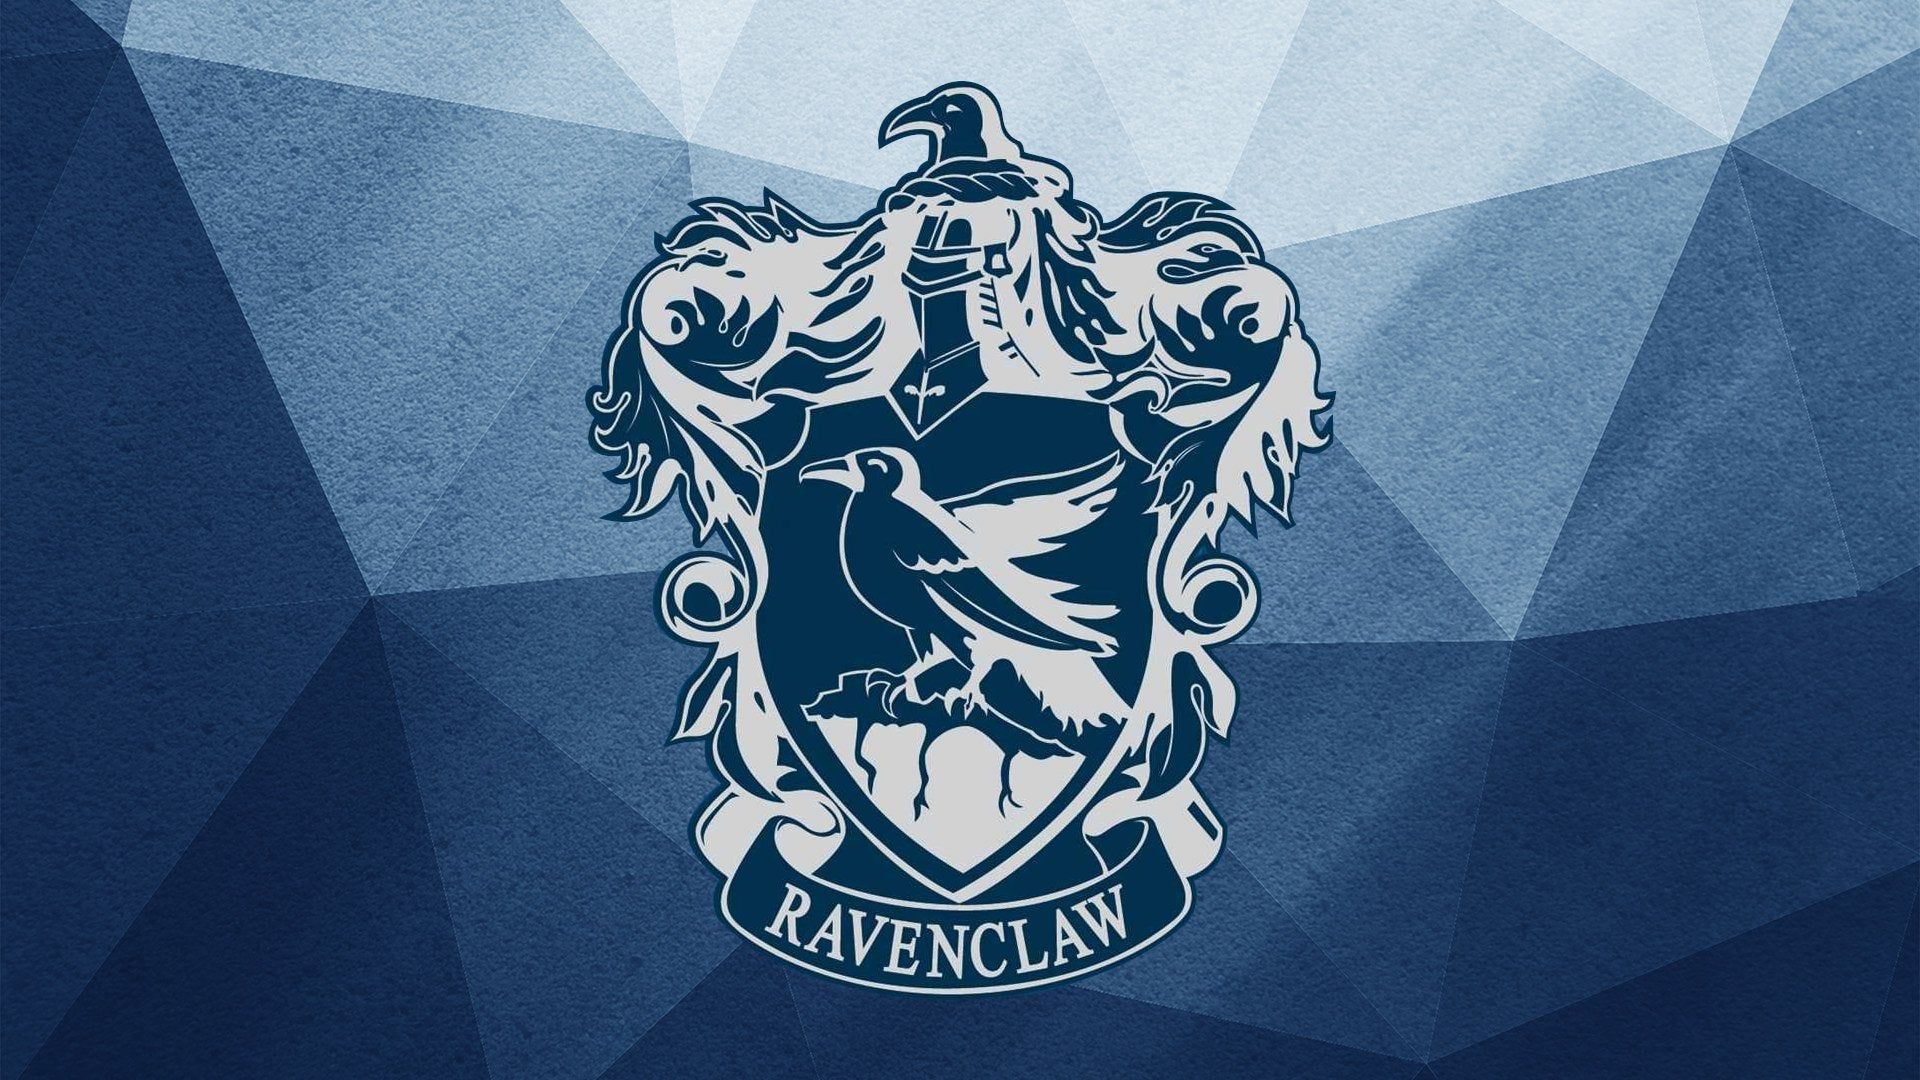 Ravenclaw - HP wallpaper by axolotl_wpapers - Download on ZEDGE™